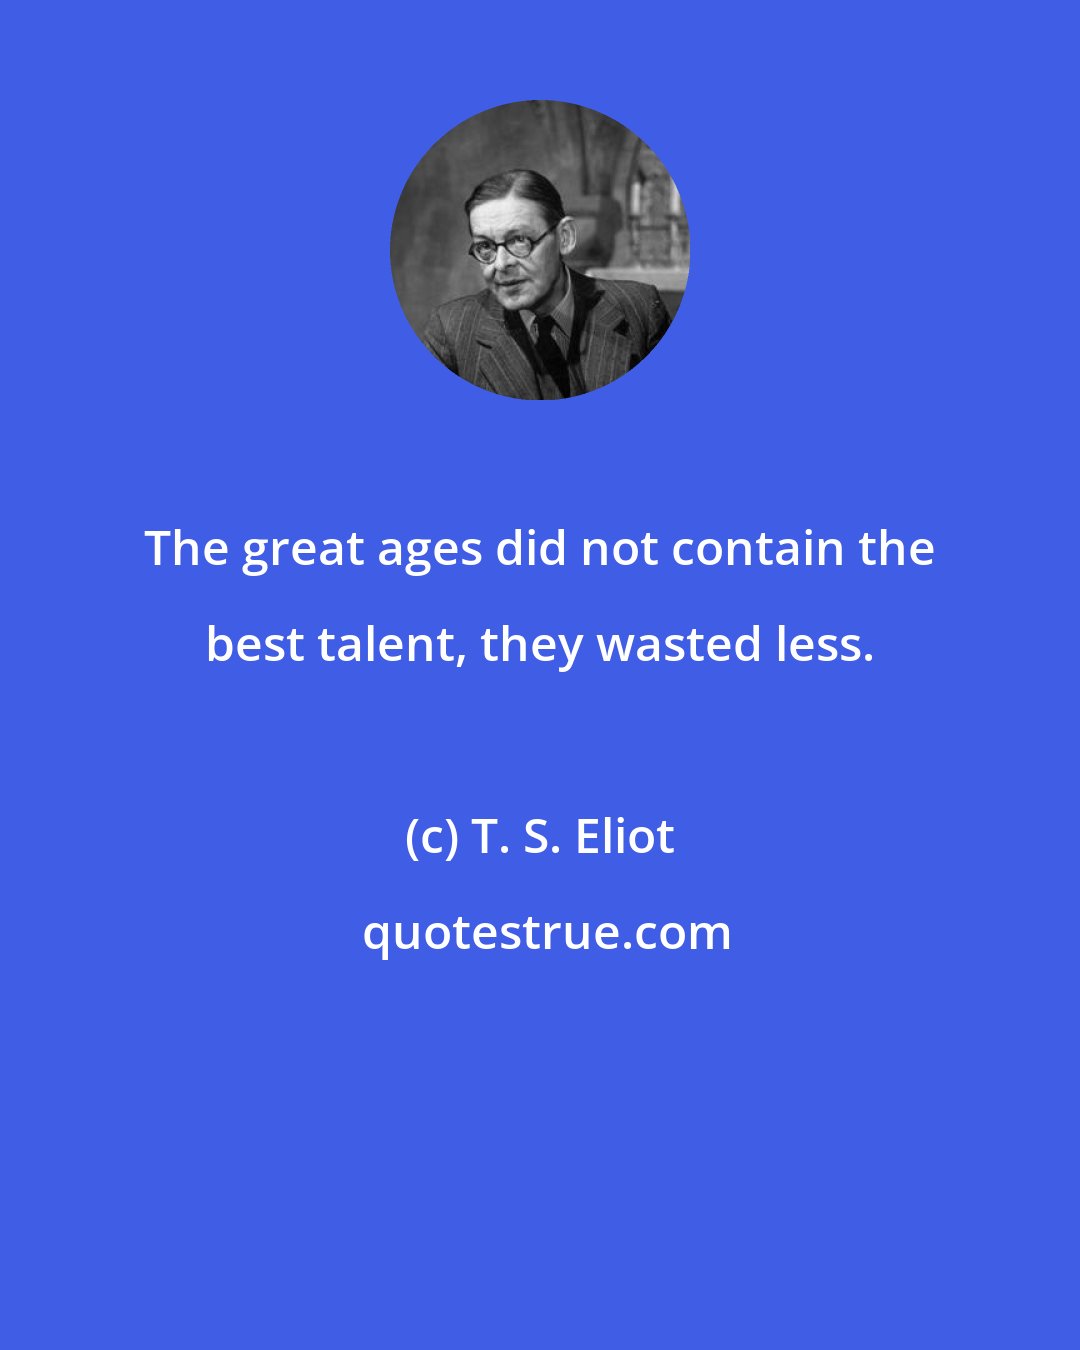 T. S. Eliot: The great ages did not contain the best talent, they wasted less.